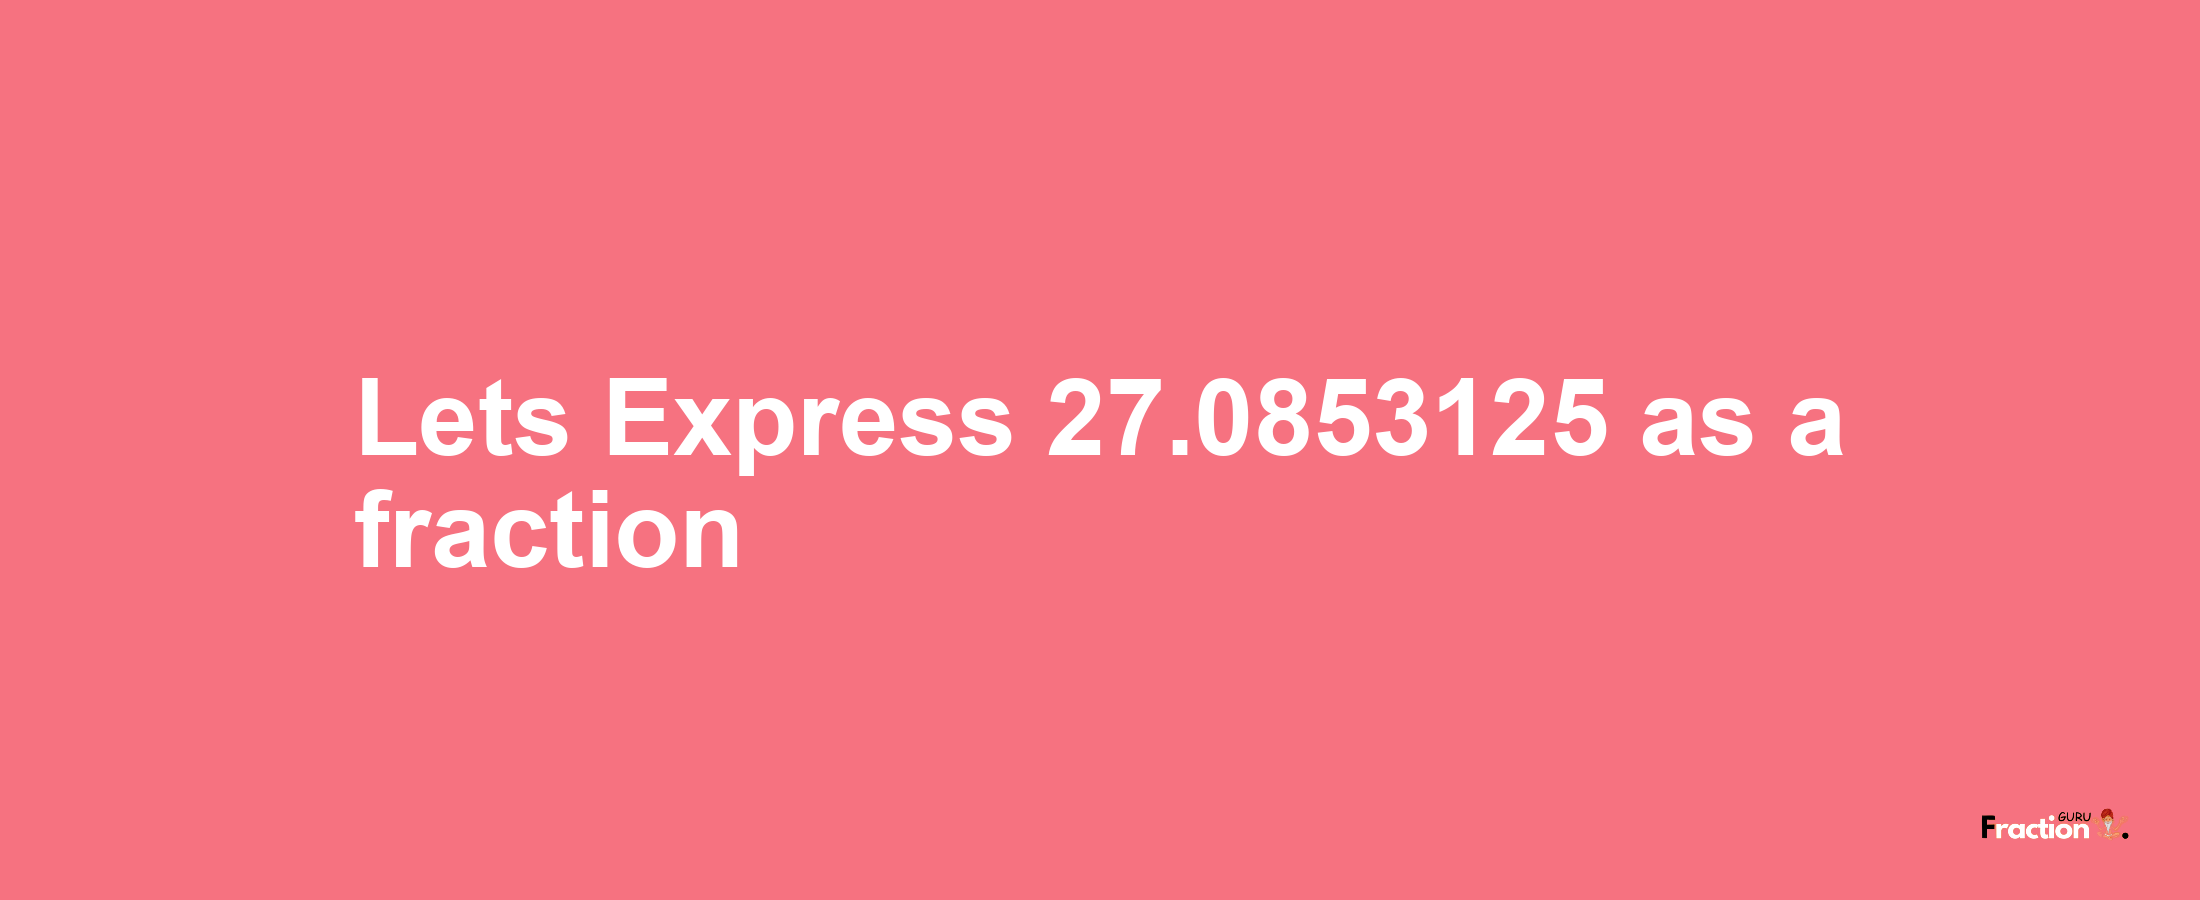 Lets Express 27.0853125 as afraction